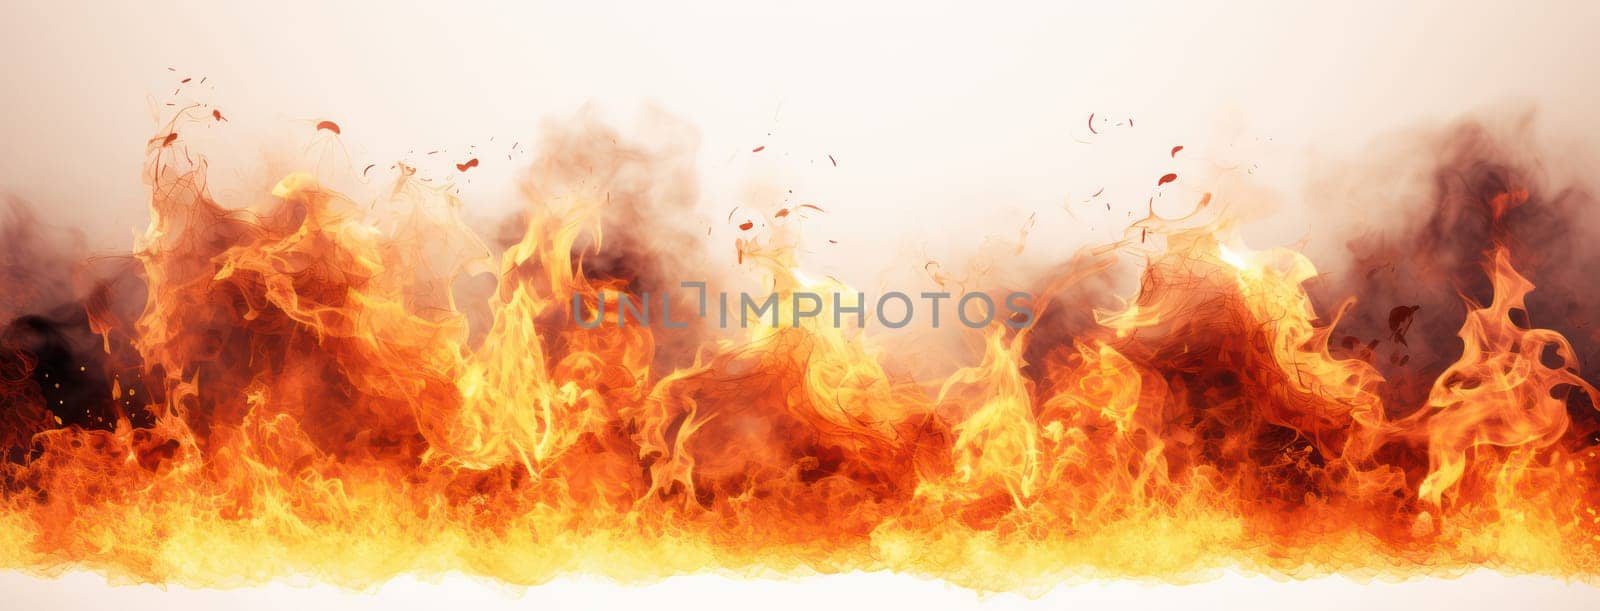 Inferno Heat: A Fiery Dance of Dangerous Flames on a Yellow and Red Background